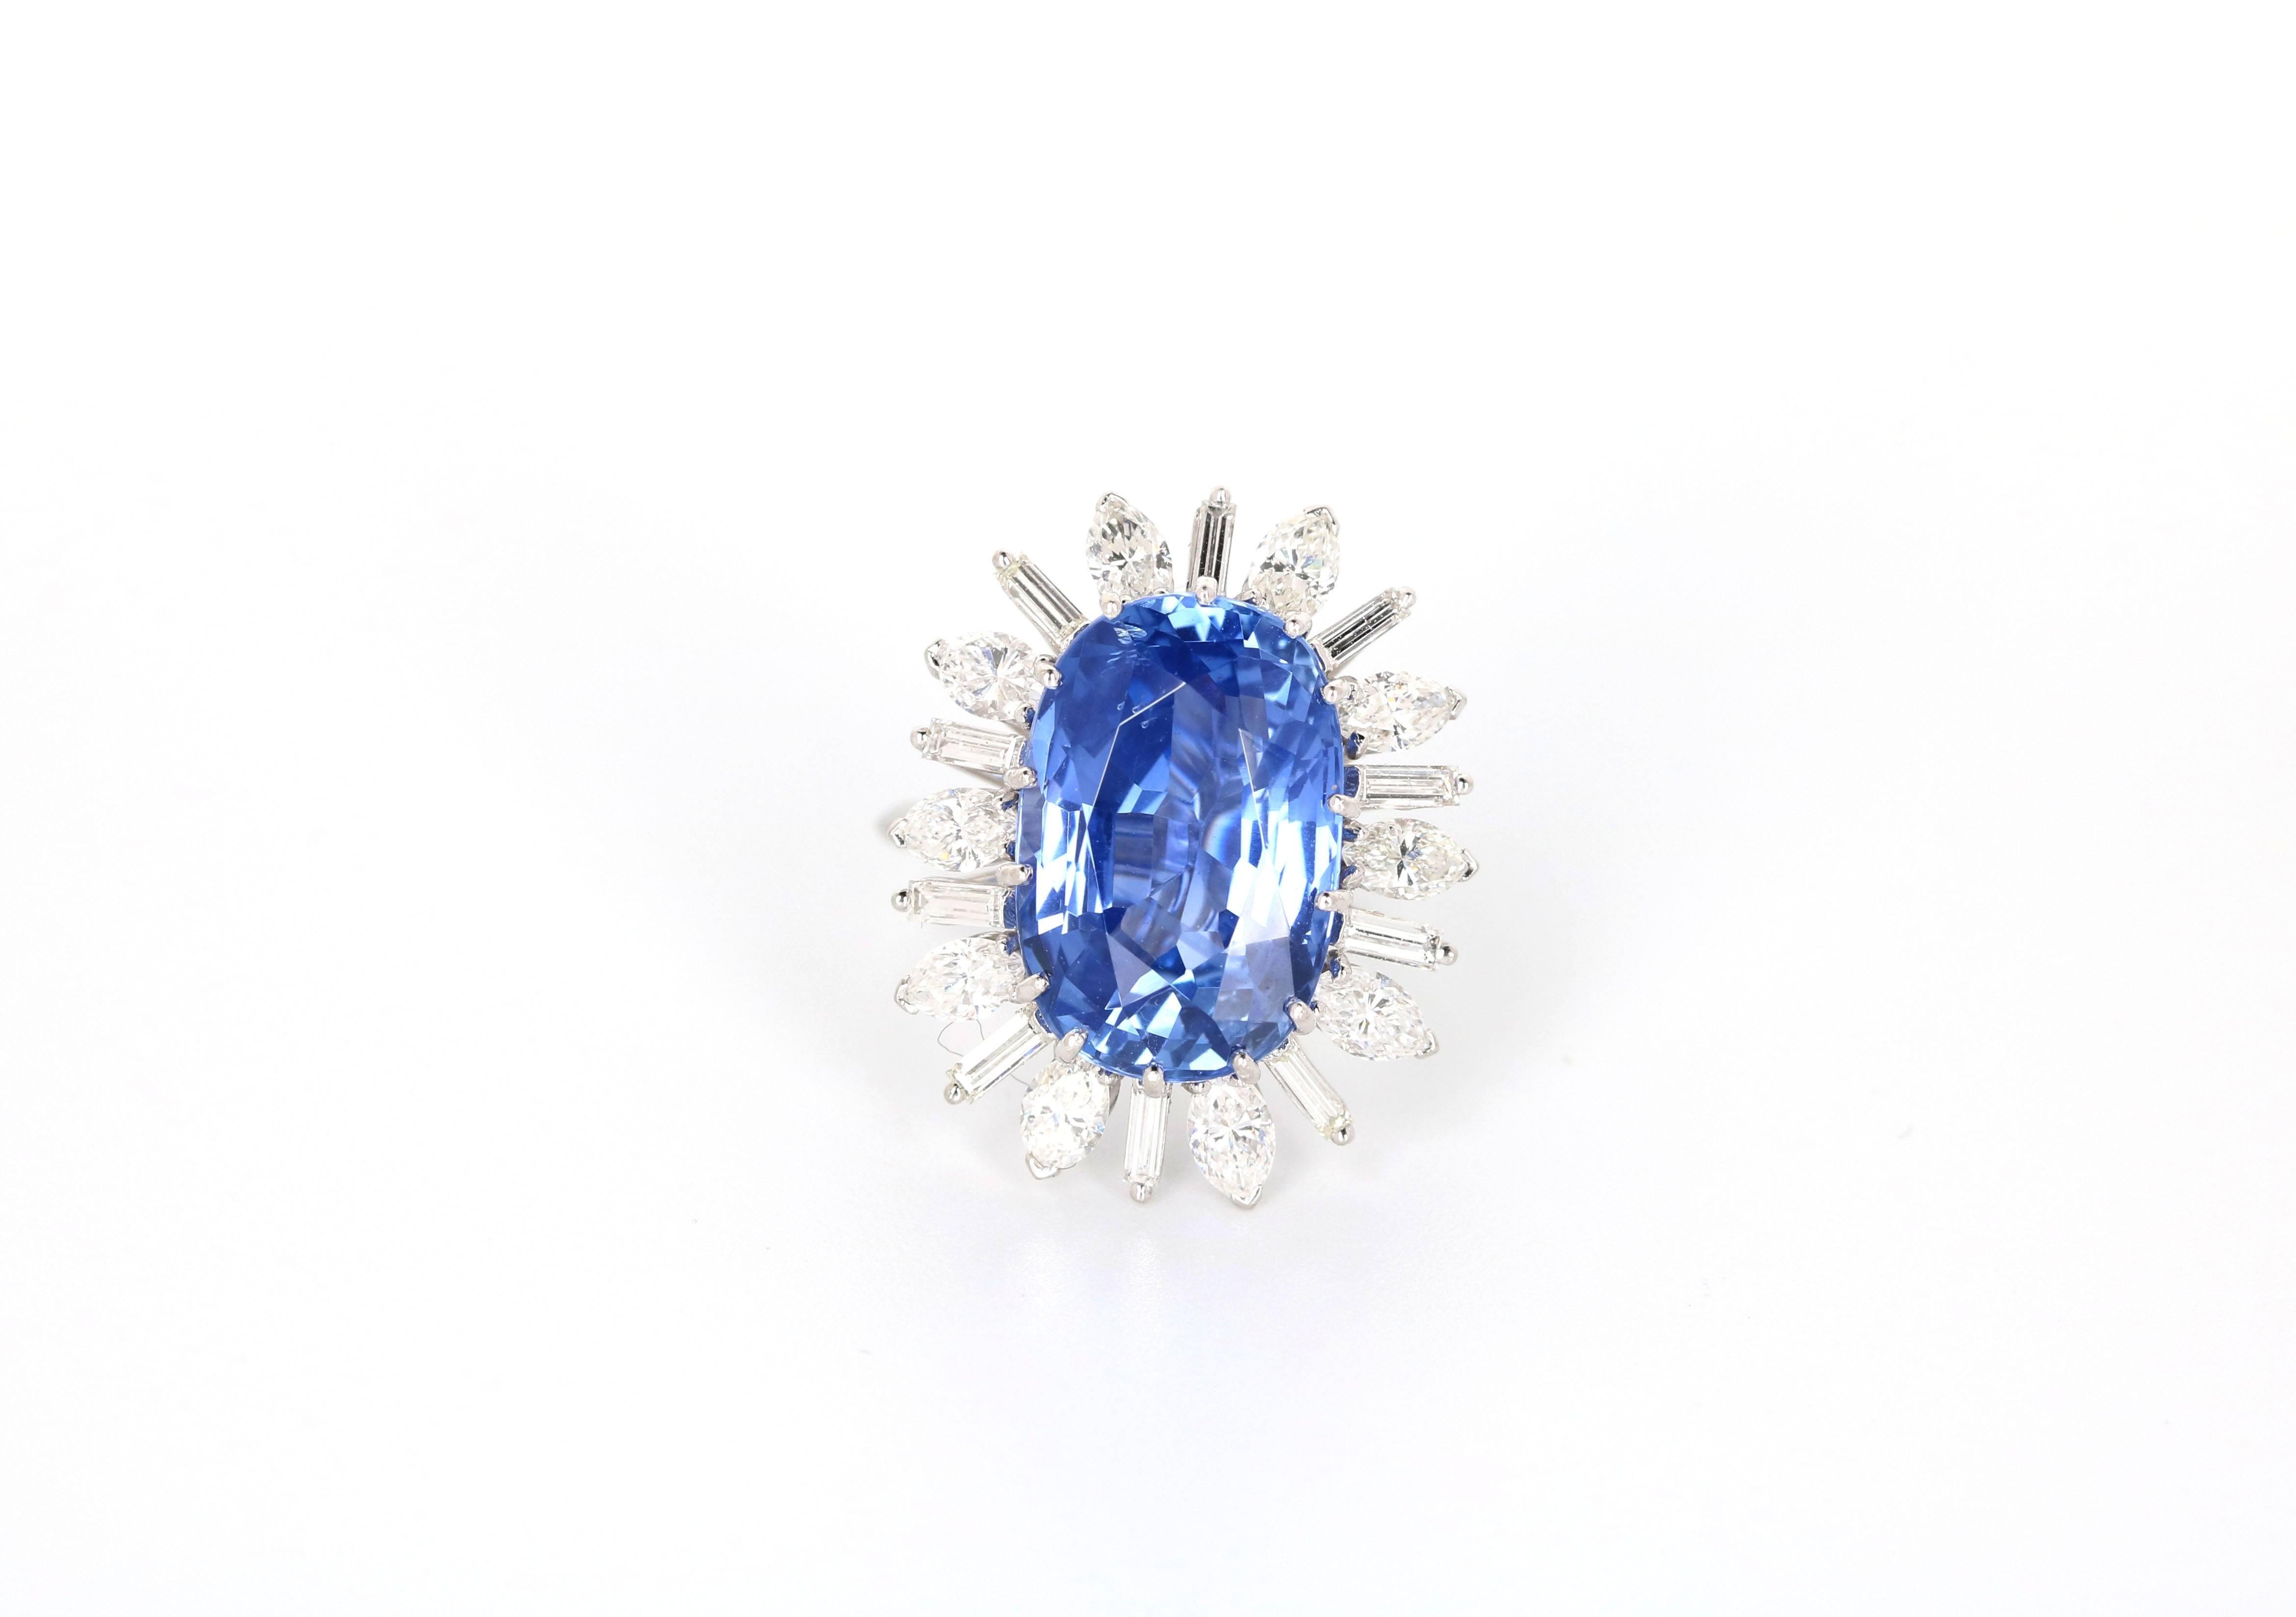 A very elegant ring with a unheated blue oval scissor step cut Ceylon sapphire of 13.20 carats. Surrounded by 10 navette shape diamonds weighing approximately 1.50 carats and 10 tapered baguette diamonds weighing approximately 0.50 carats in a 18K